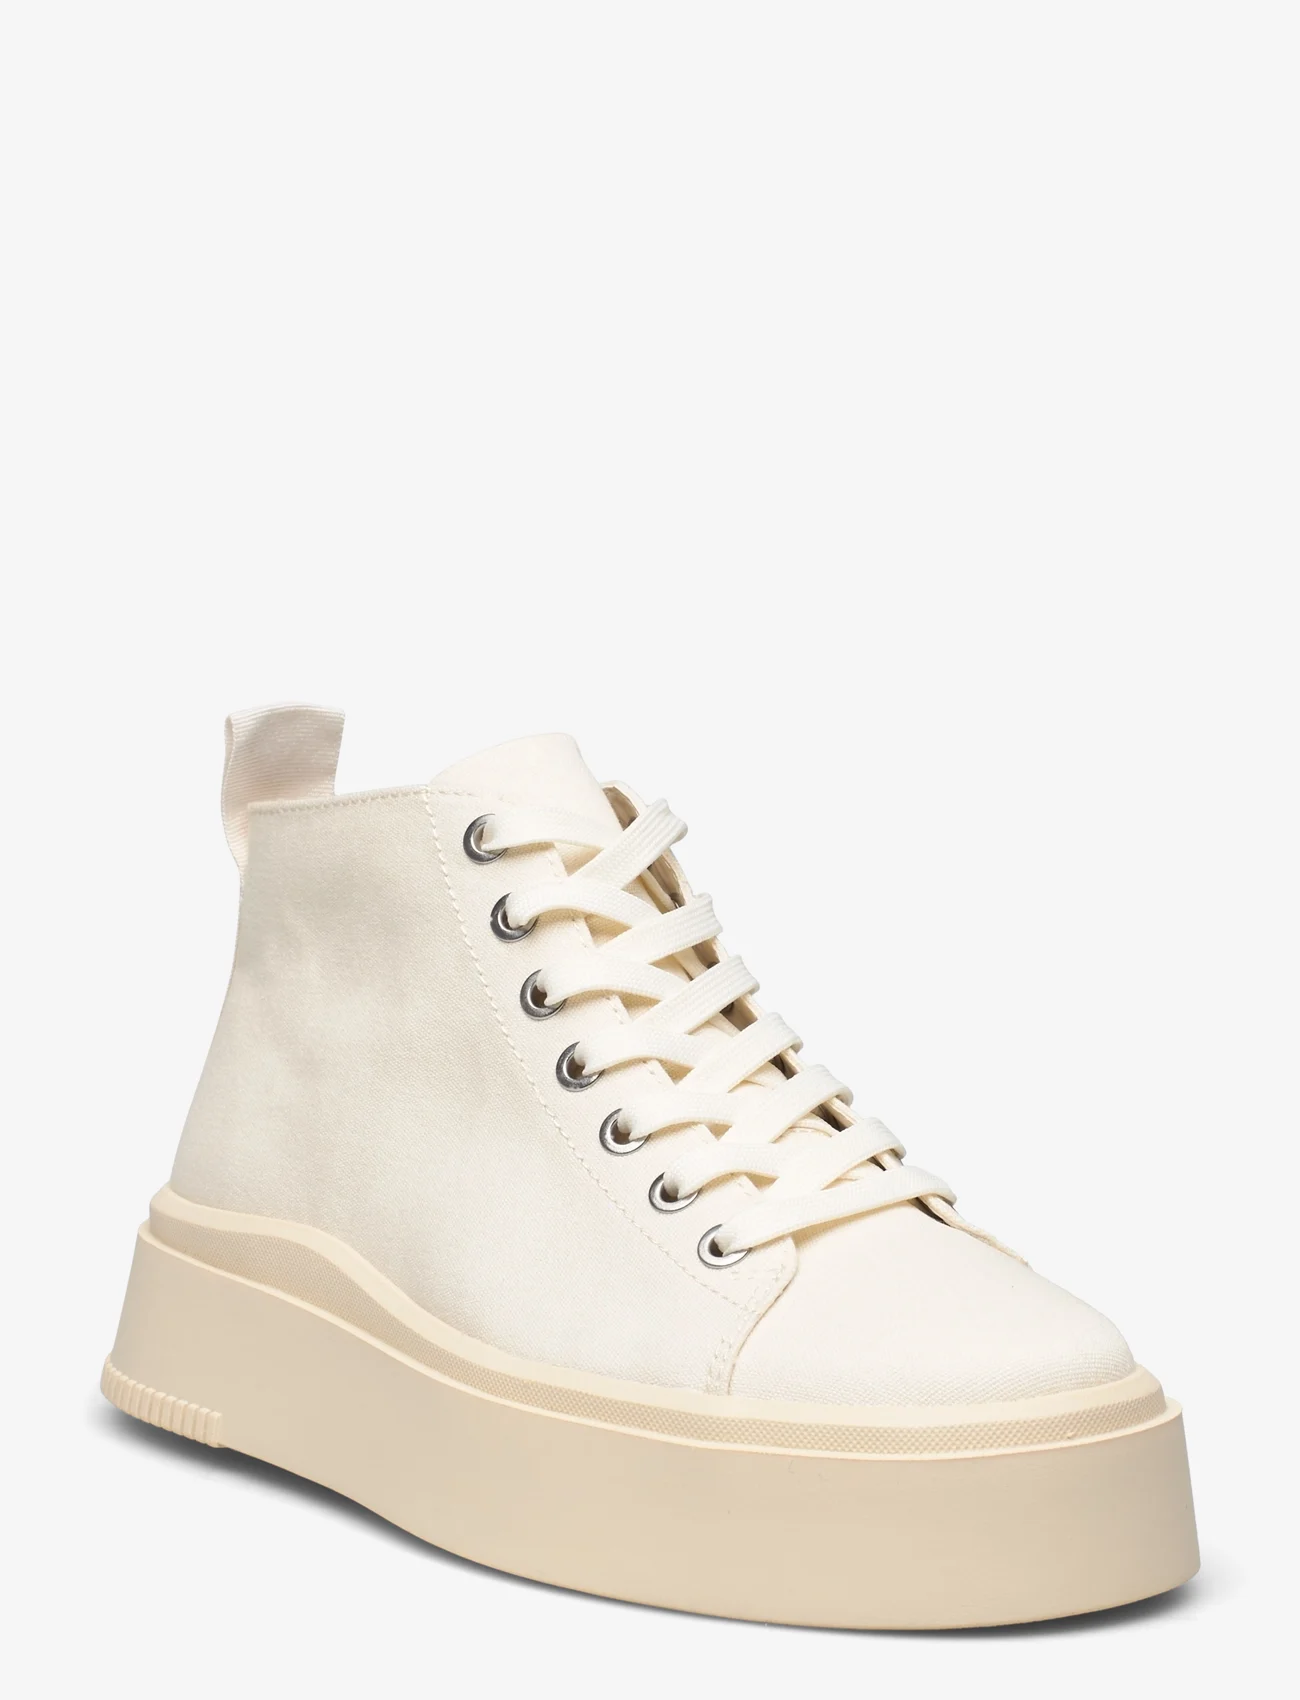 VAGABOND - STACY - high top sneakers - white - 0